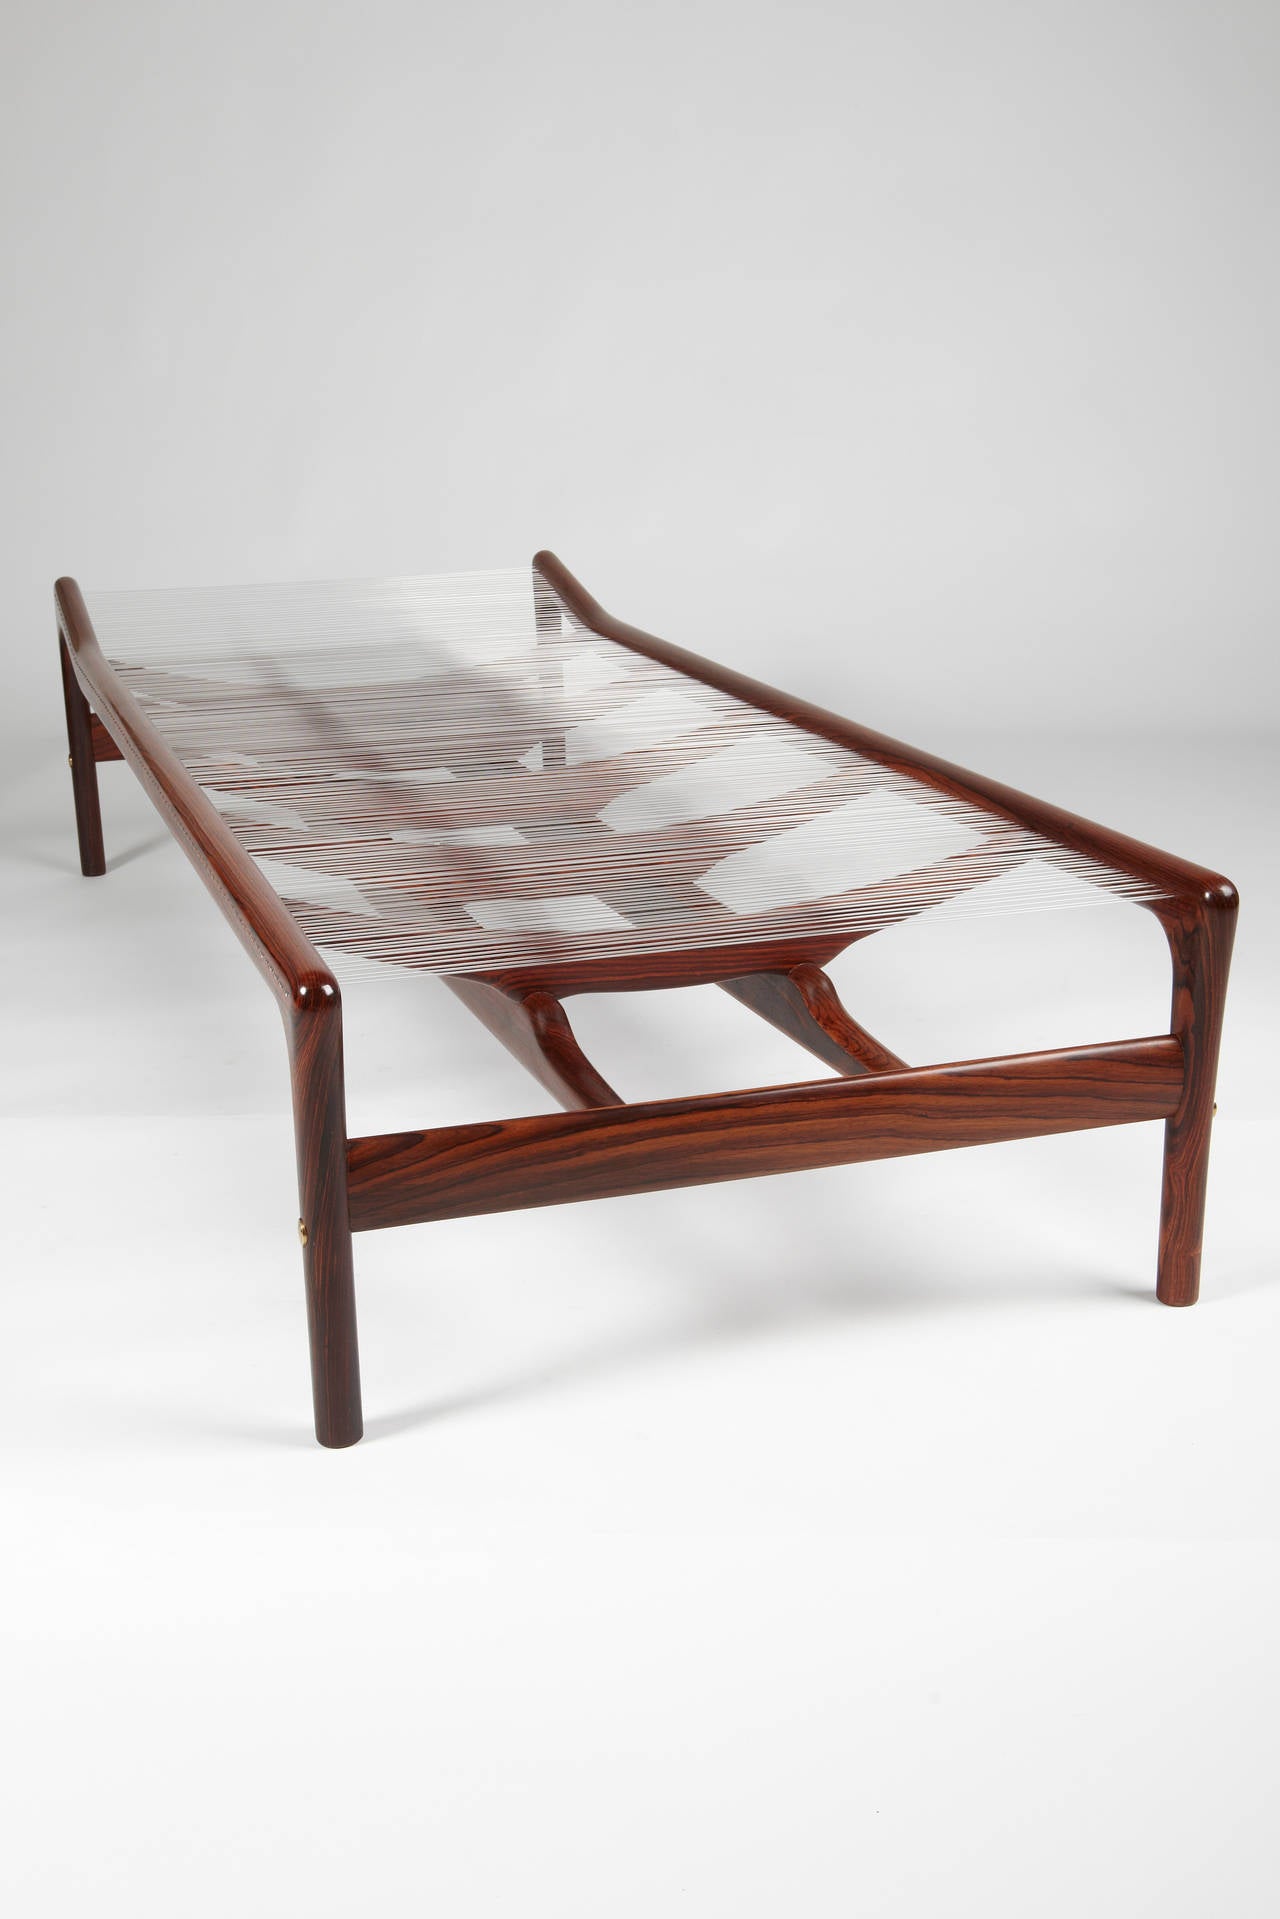 This daybed designed by Helge Vestergaard Jensen in 1955 was made under license by Niels Roth Andersen, the Alderman of the Copenhagen Cabinetmakers' Guild in 2014. In the year before his retirement, Niels Roth Andersen made limited edition of six